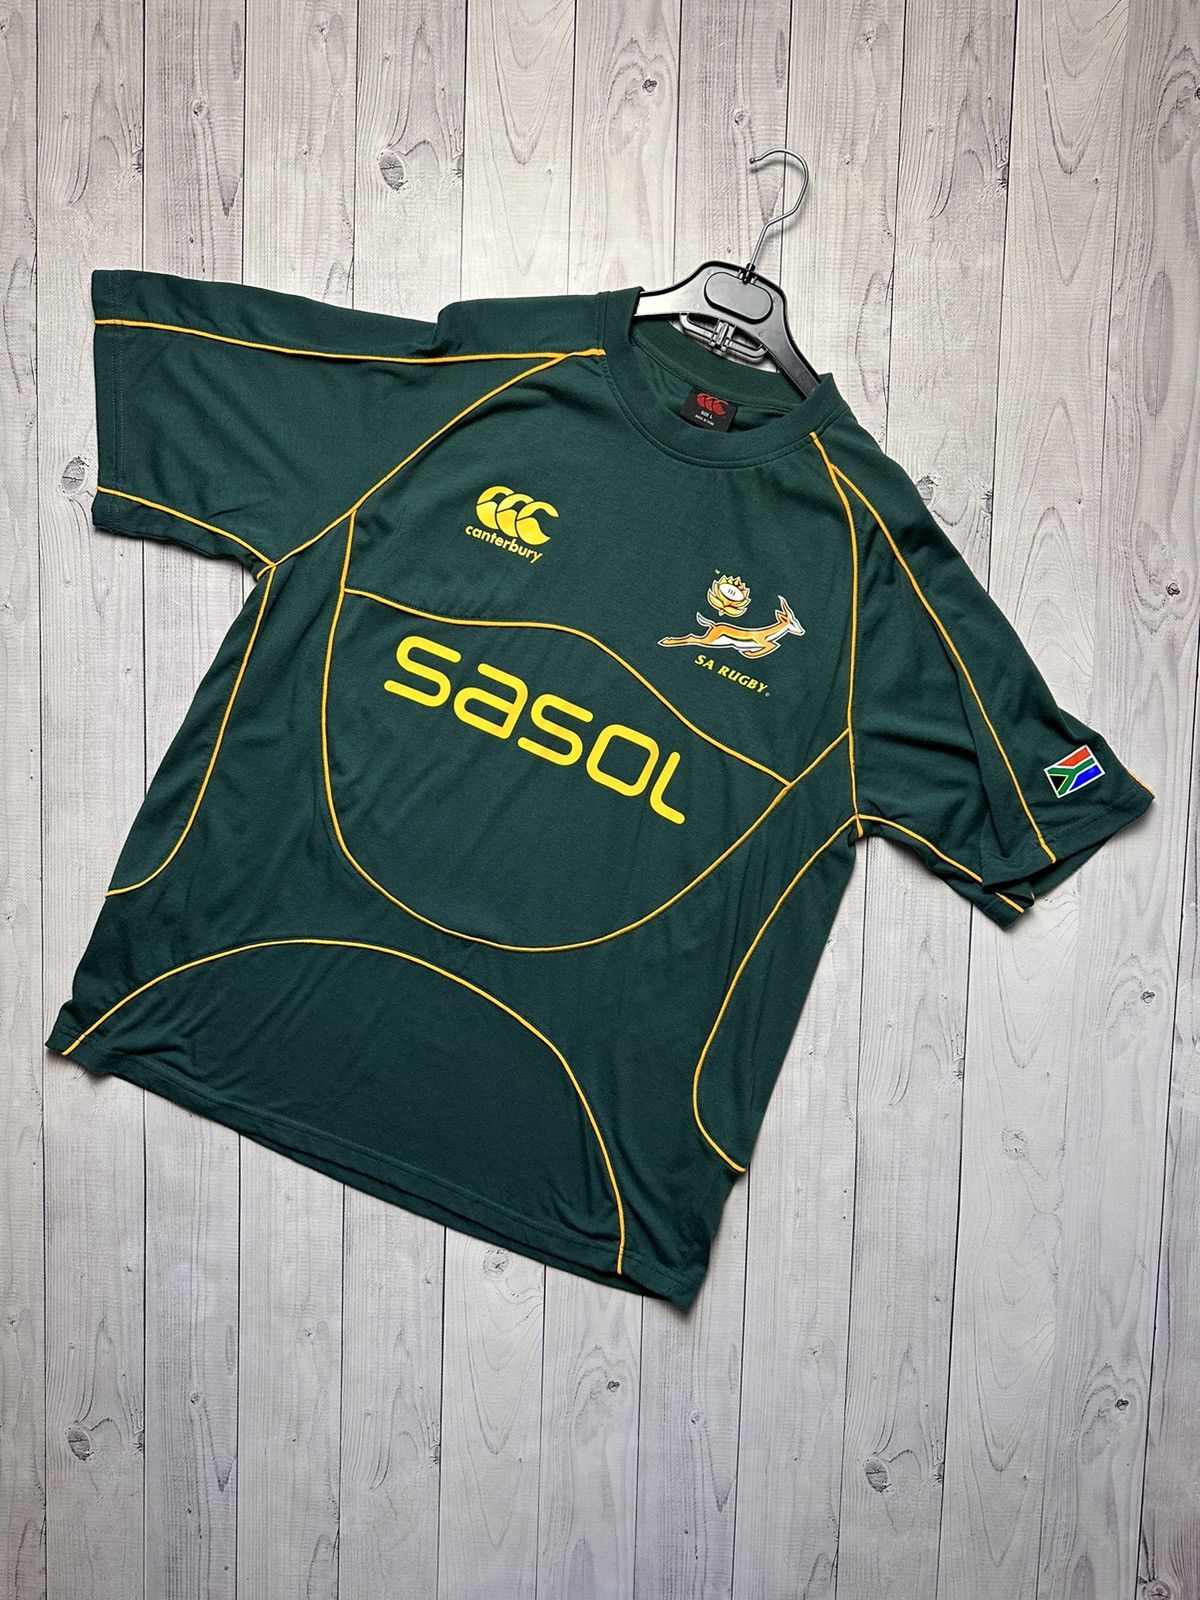 SASOL, Authentic South Africa Sasol Rugby Jersey Canterbury Size Large